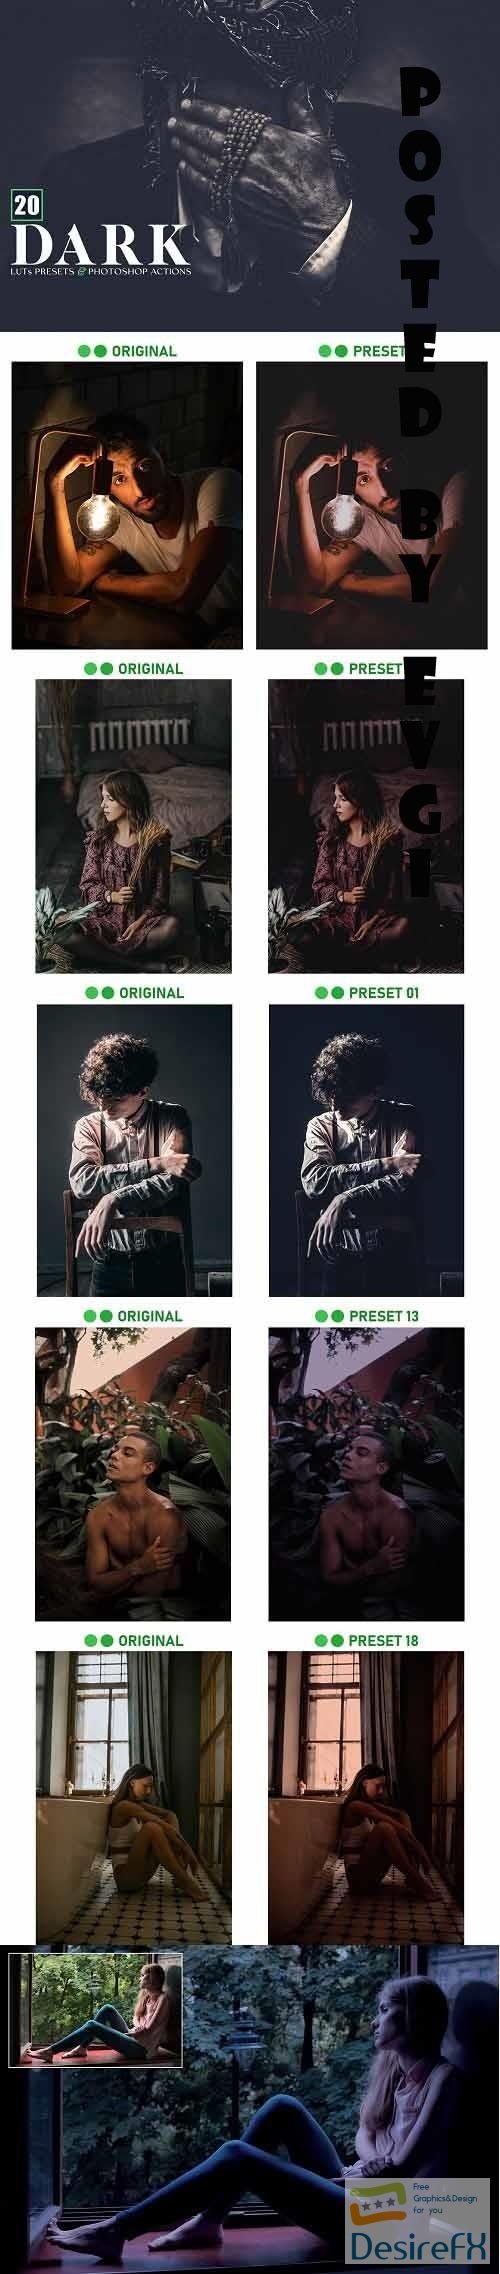 Dark LUTs Presets and Photoshop Action - 6919409